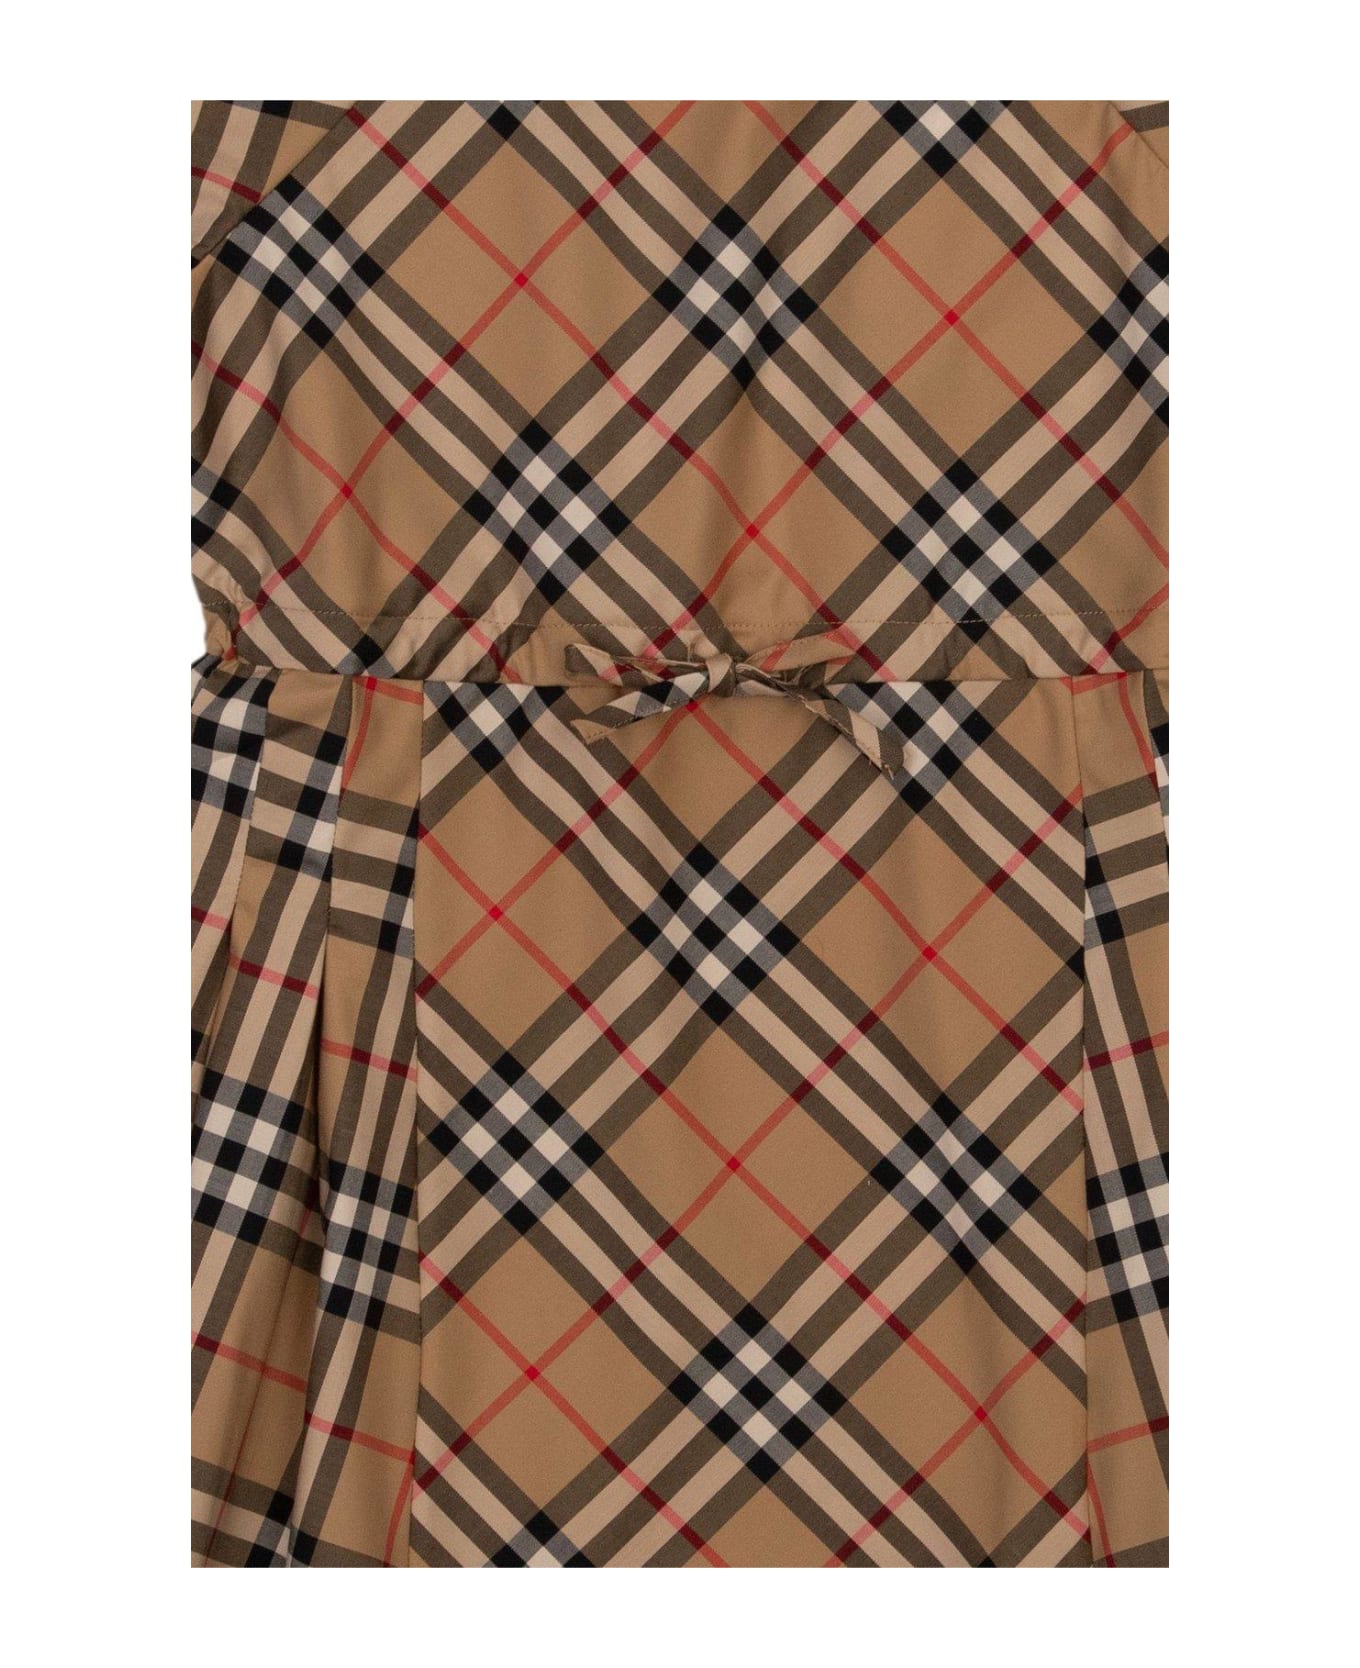 Burberry Checked Short-sleeved Dress - Archive beige ip chk